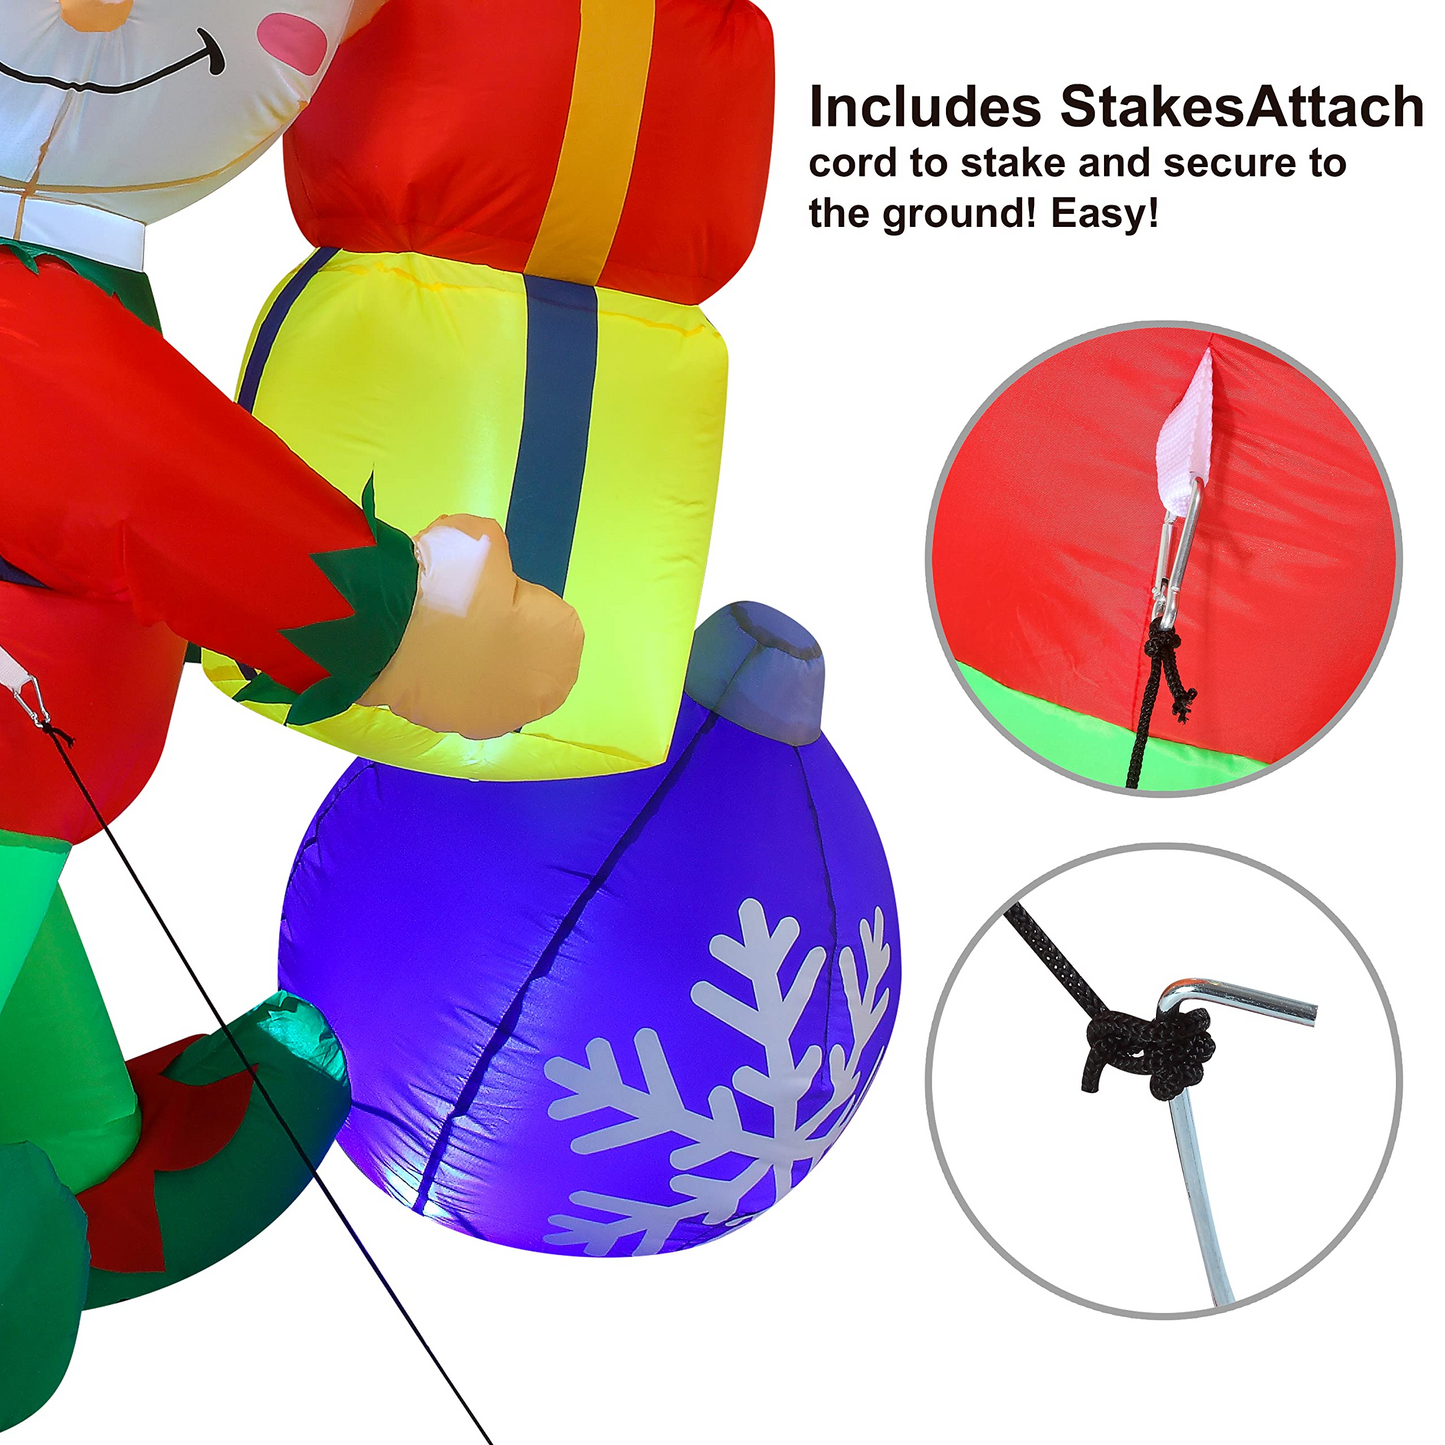 6 Ft Tall Inflatable Elf Holding Gifts